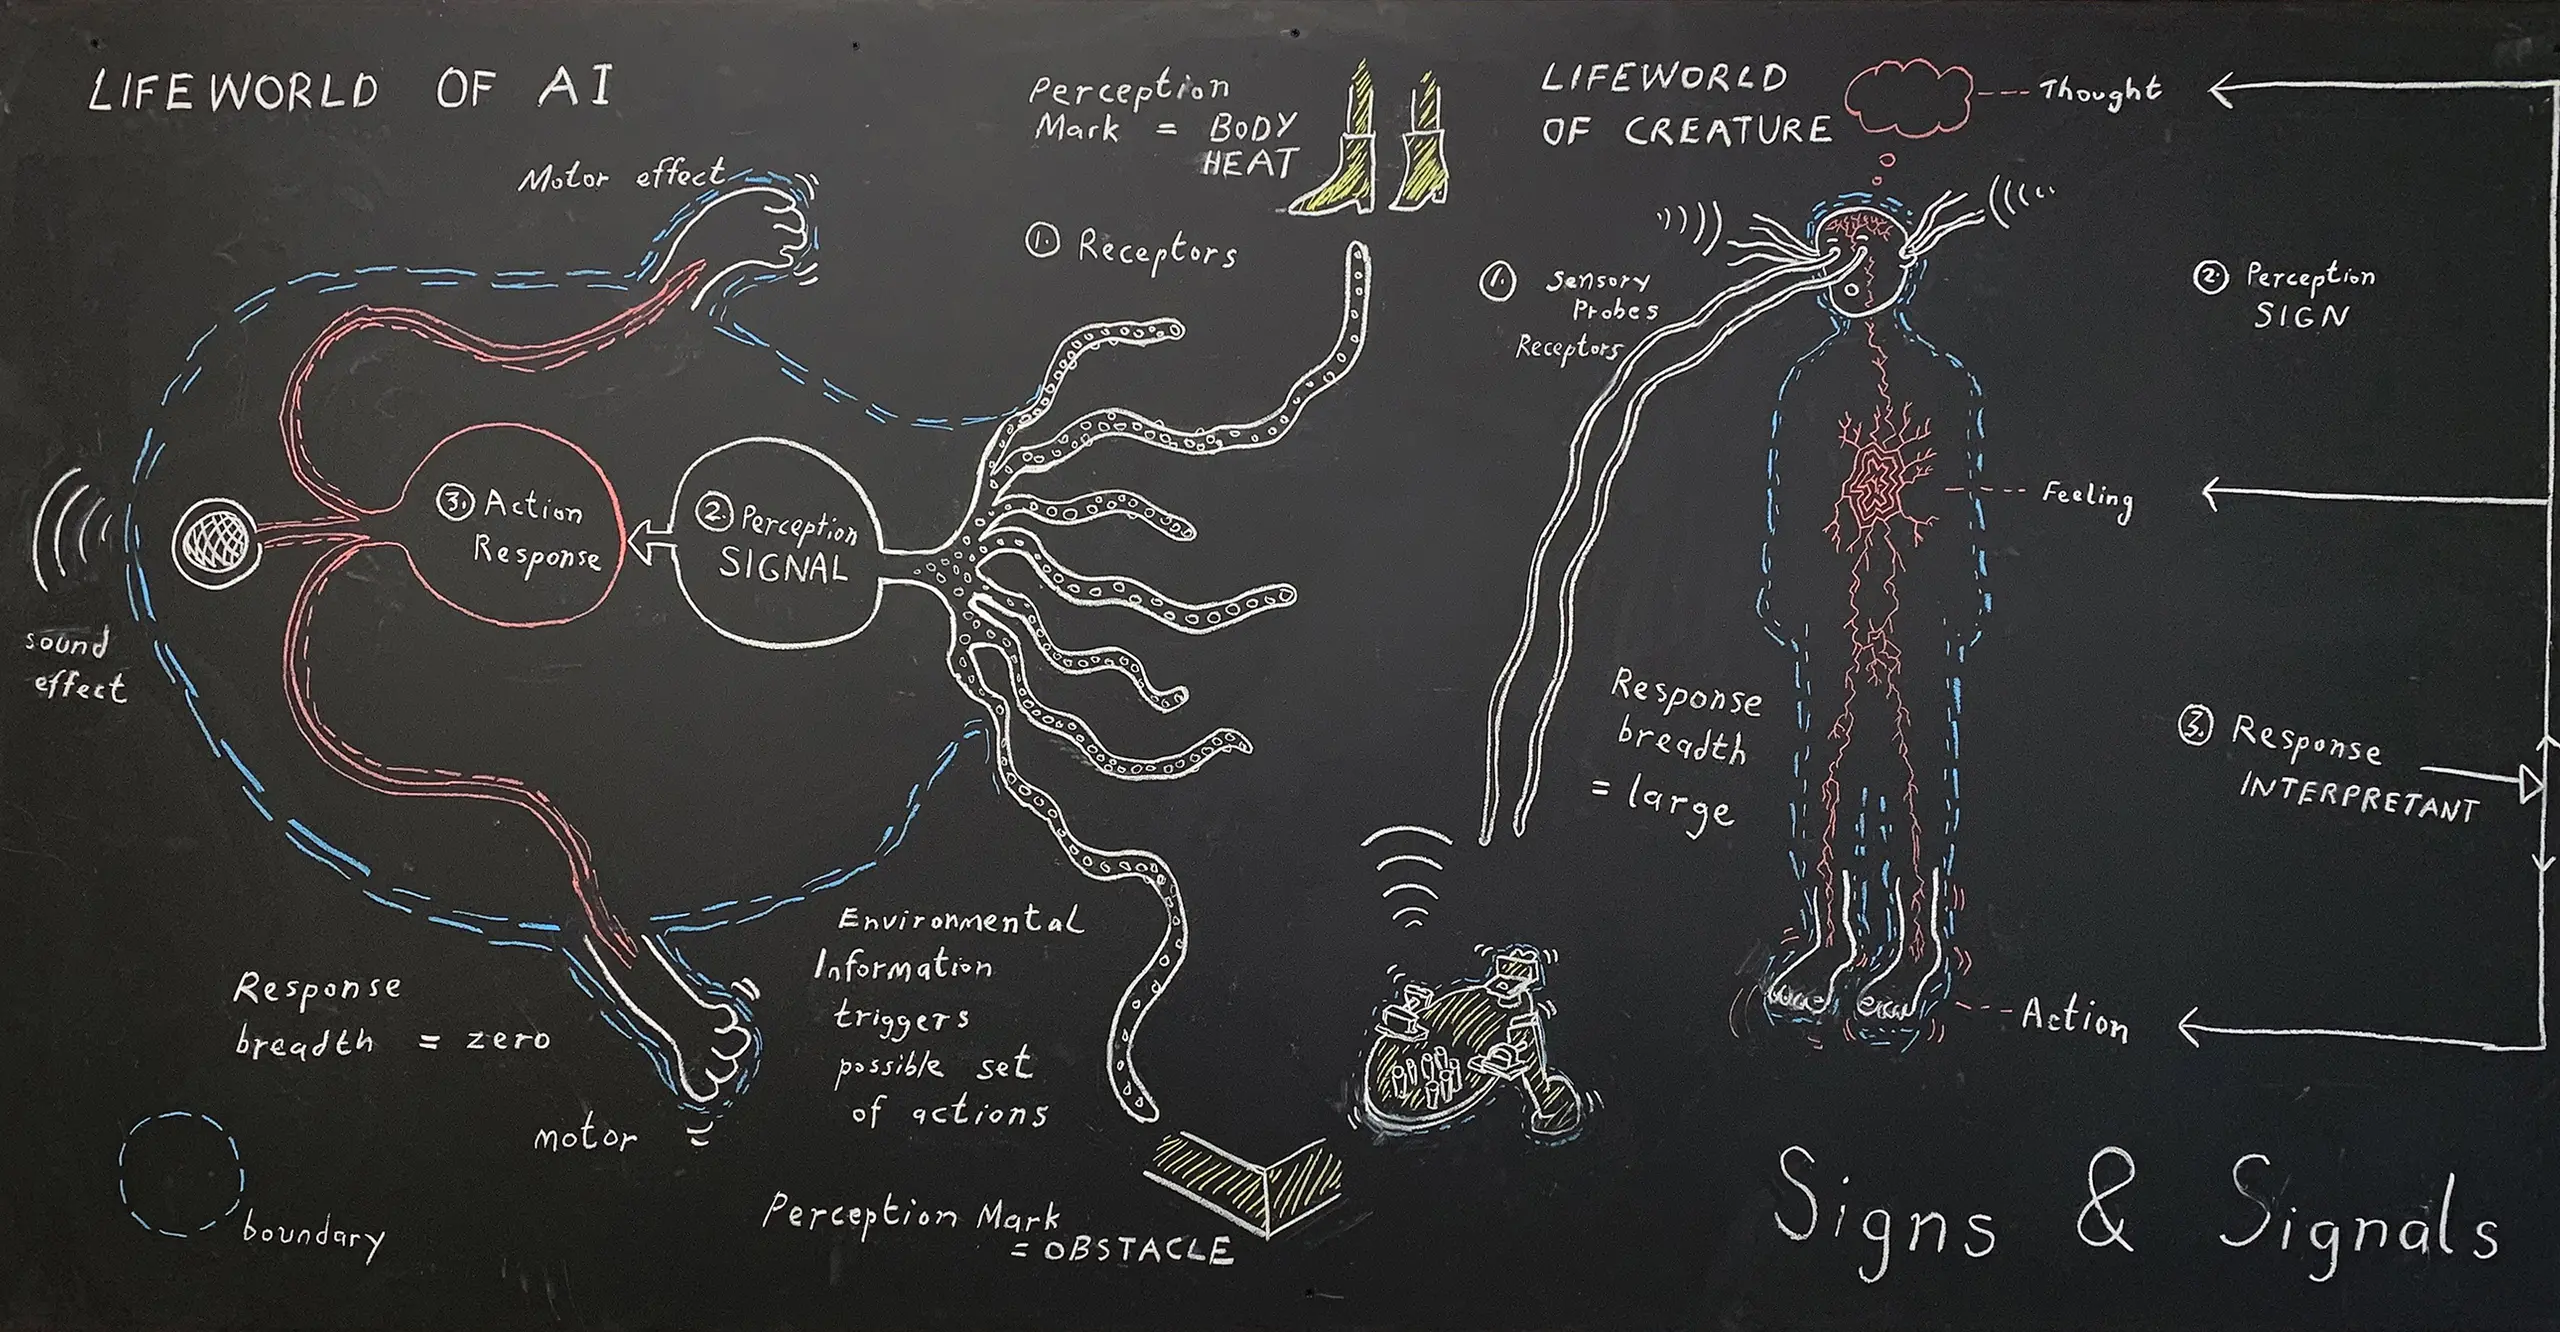 A diagram on a chalk board. The title is Lifeworld of AI.